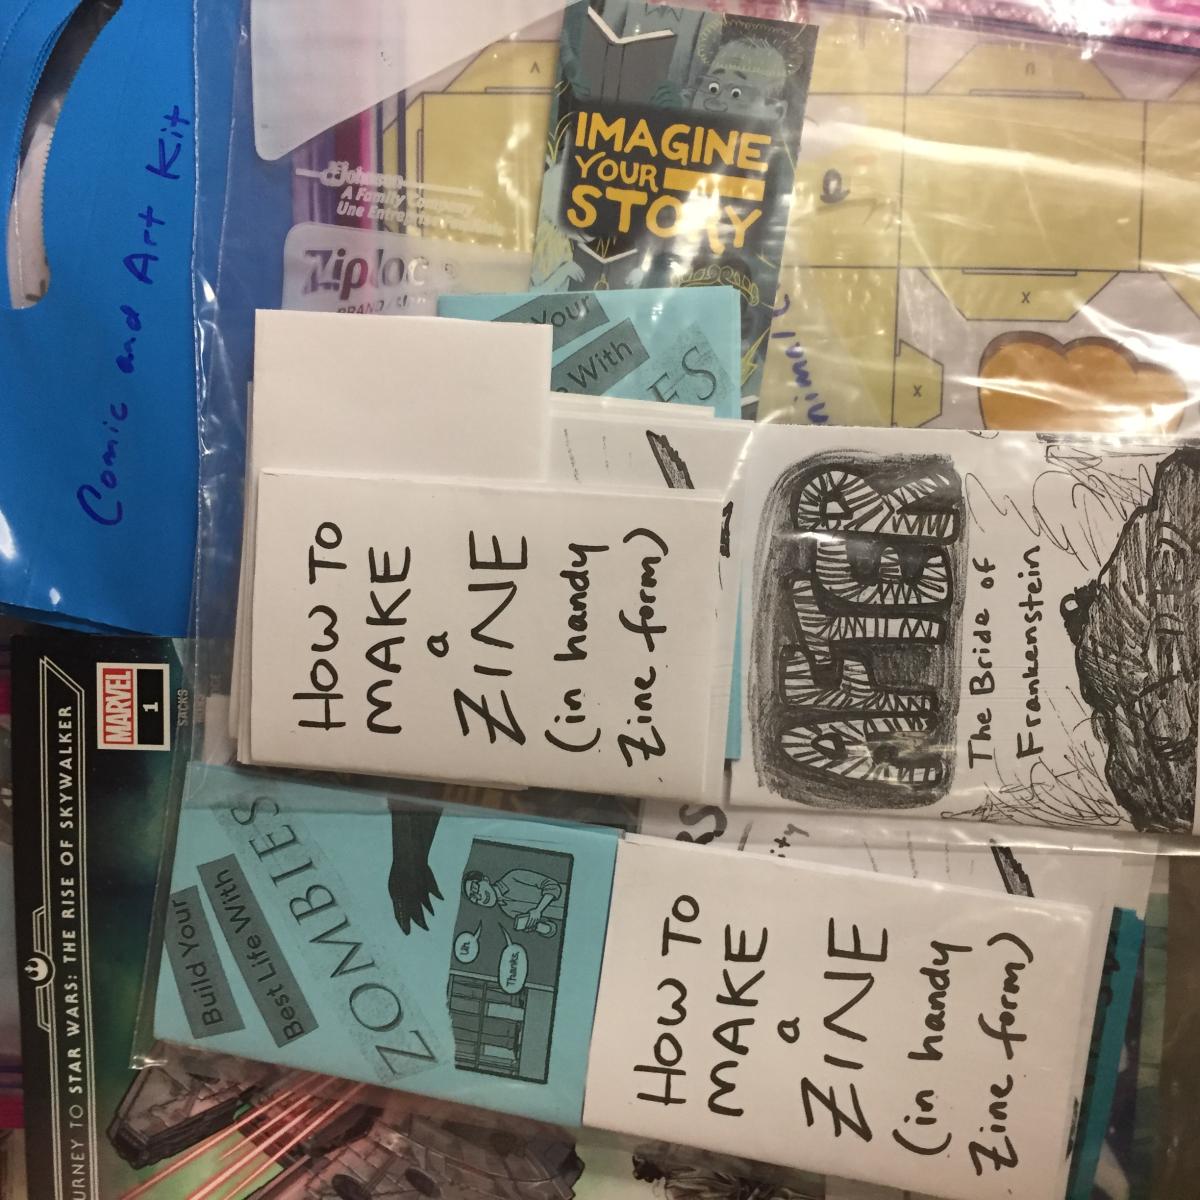 Picture of July Teen Kits in plastic bags with zine and comic supplies.